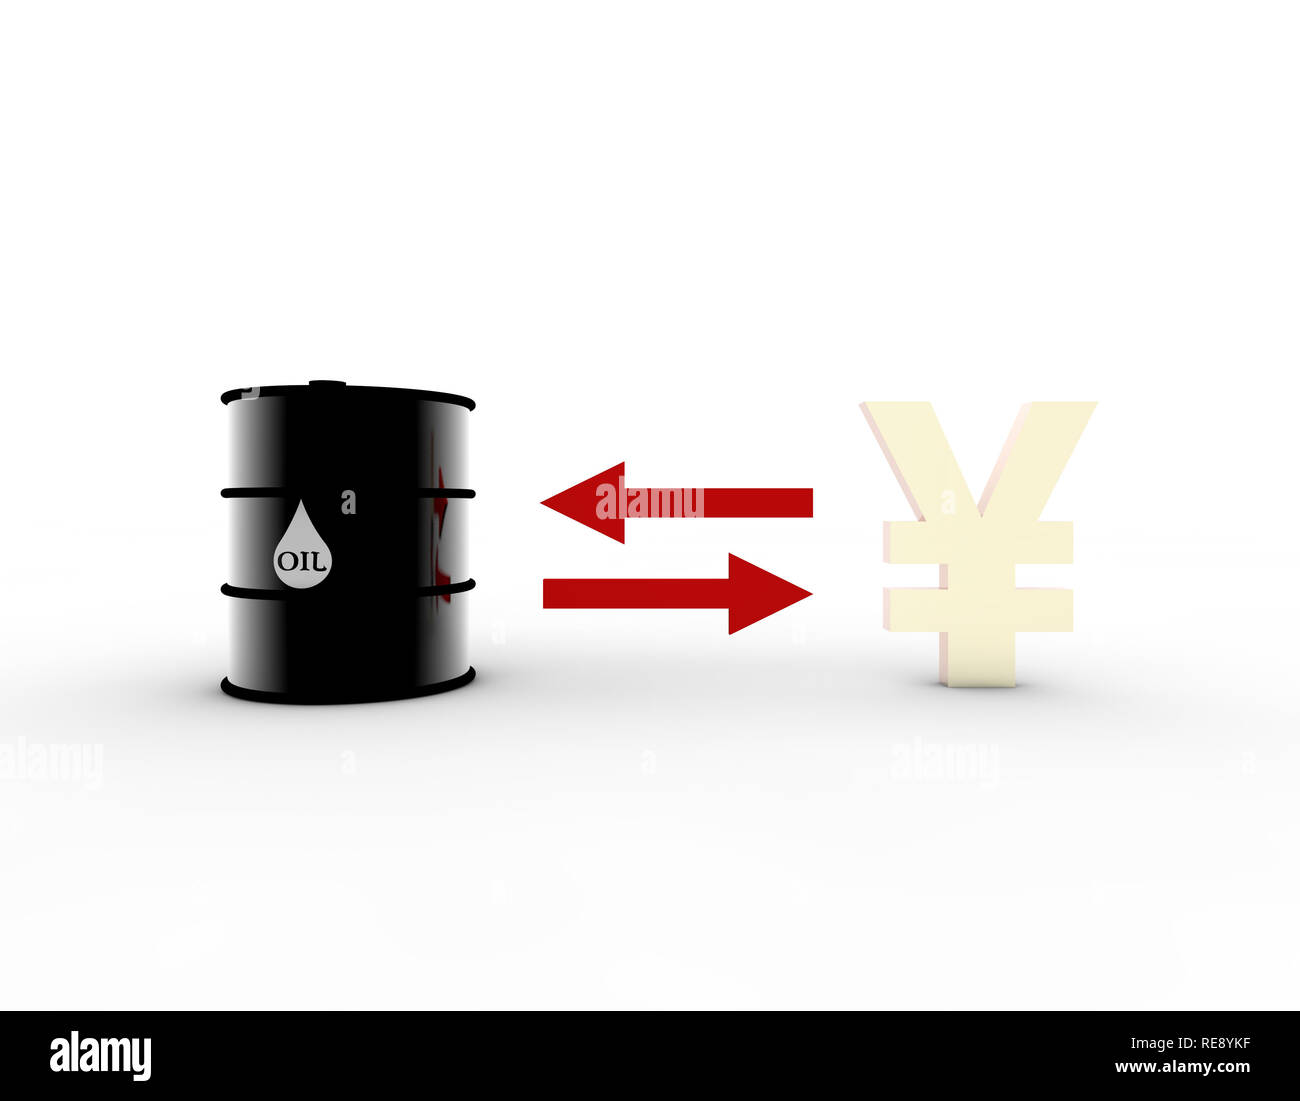 Exchange of RMB and oil, oil and RMB, energy and money Stock Photo